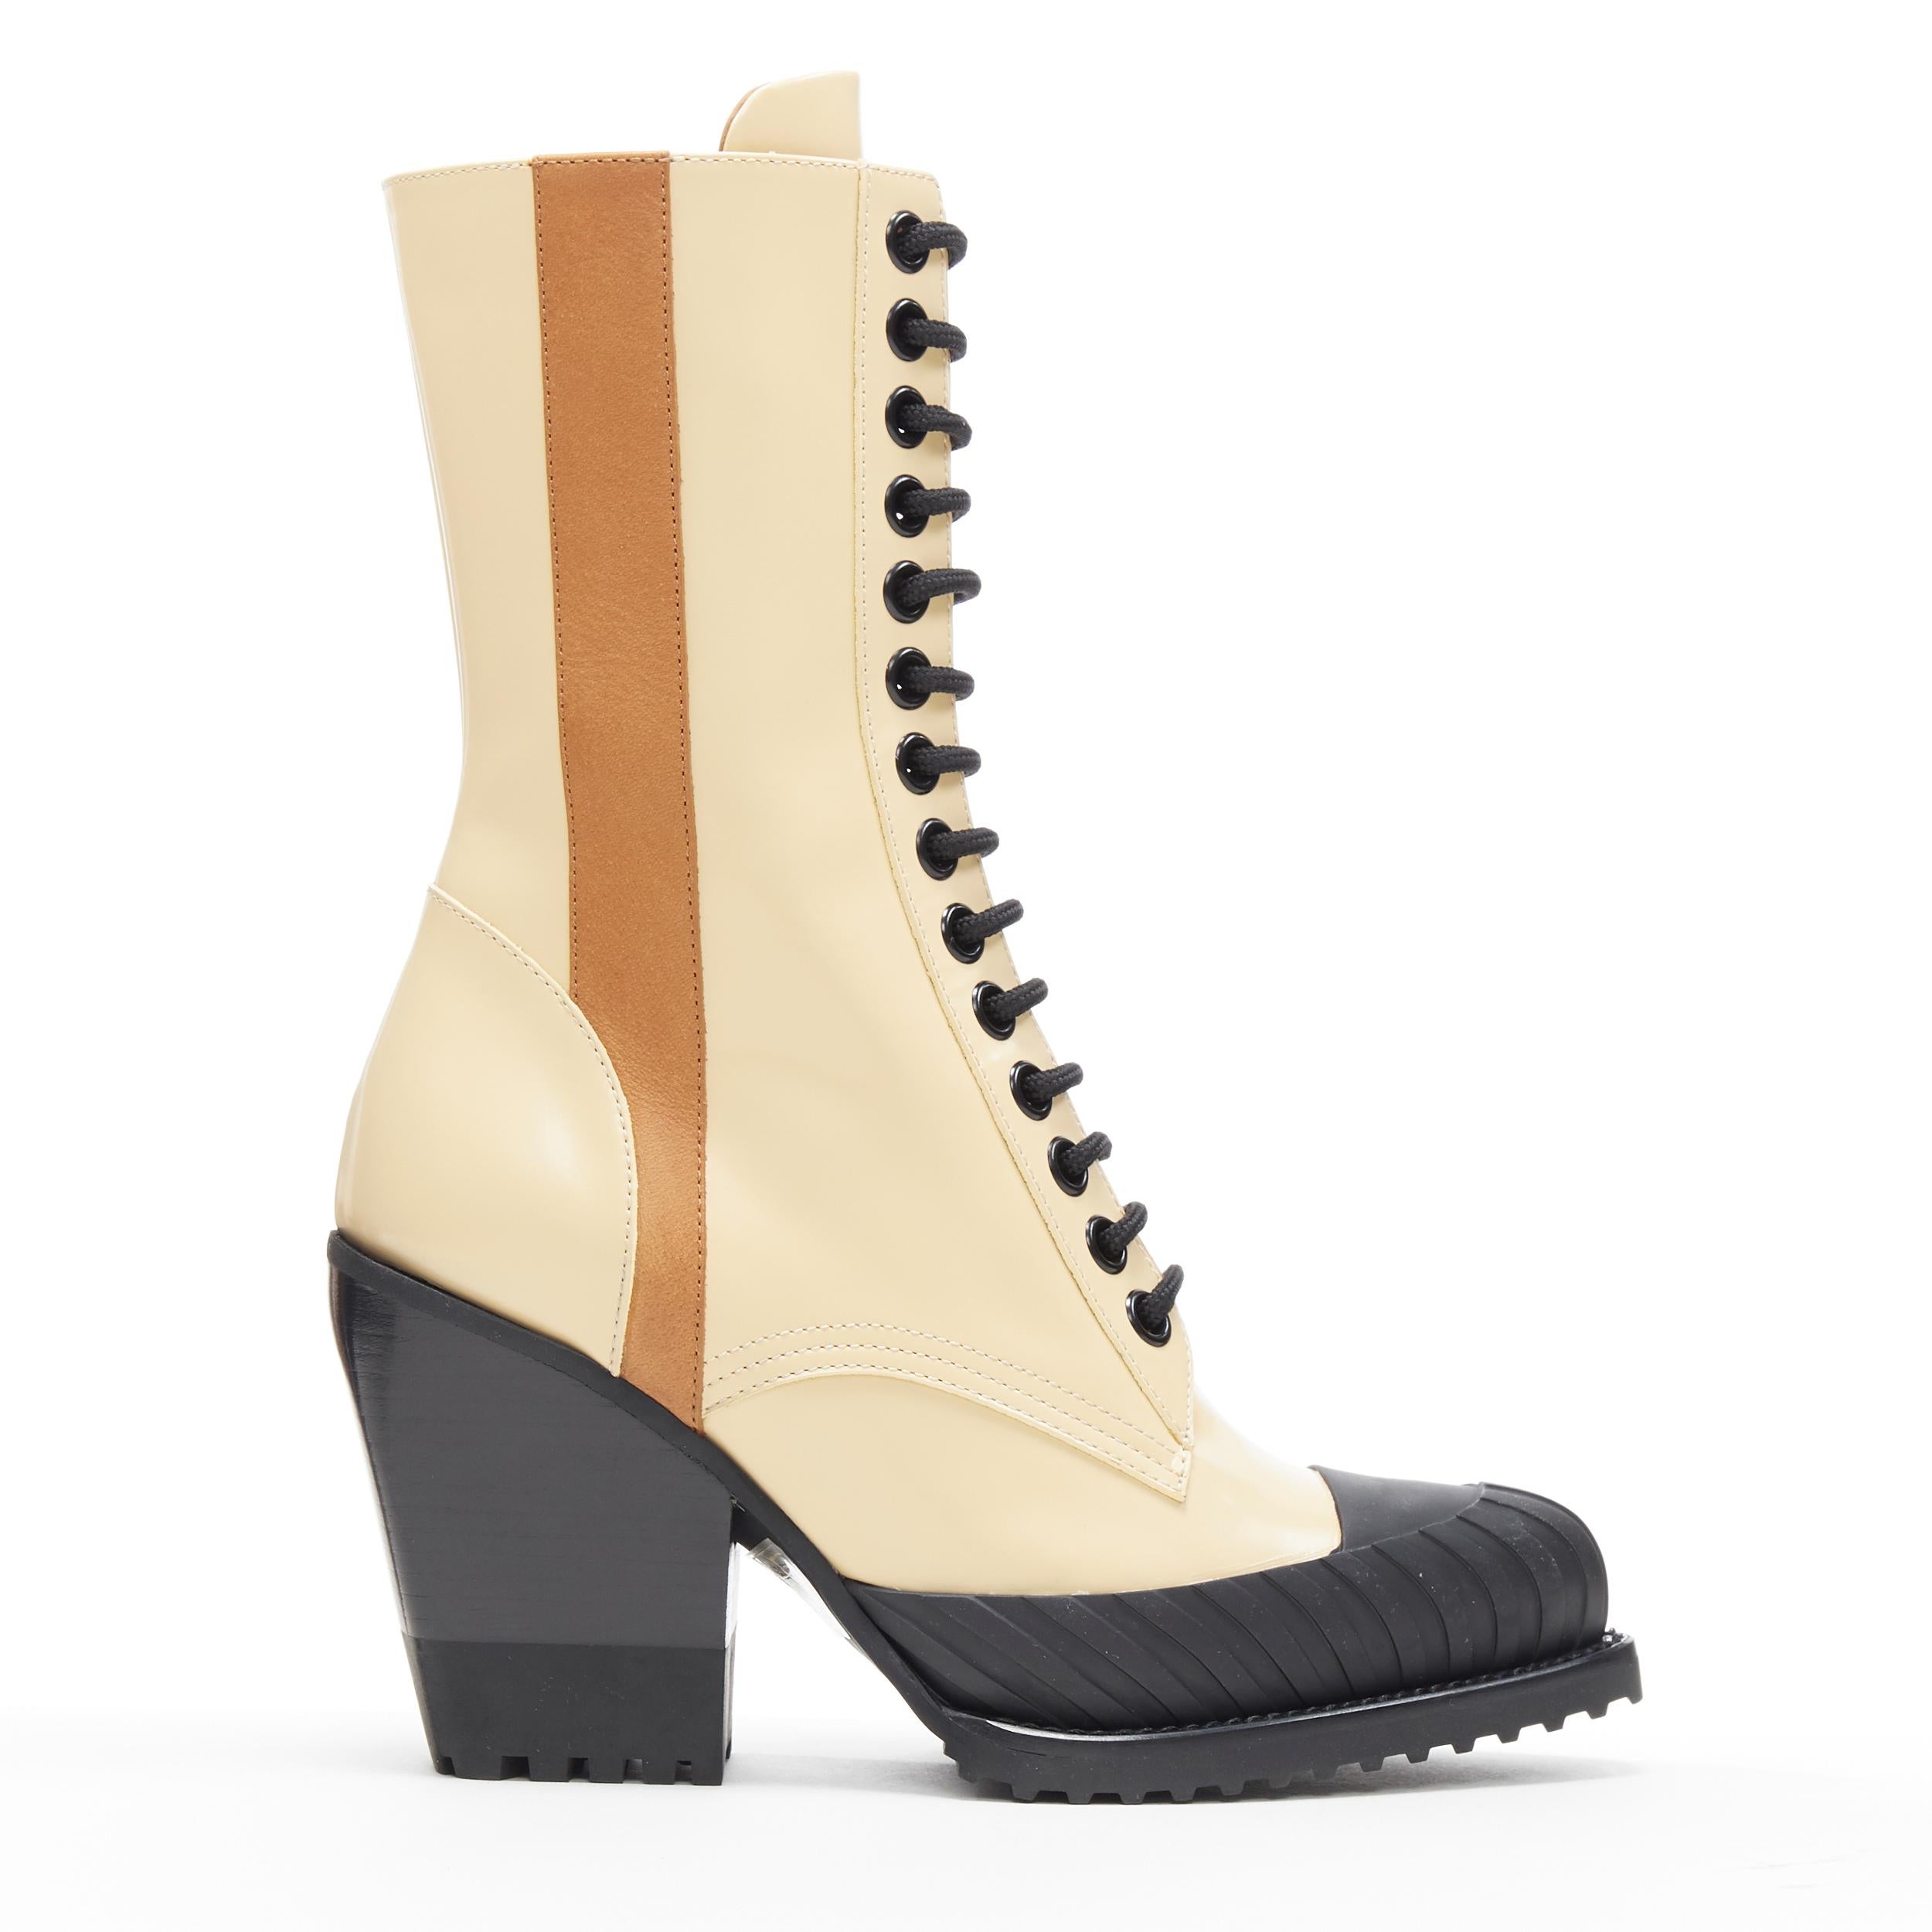 new CHLOE Runway Rylee cream brown leather block heel heel rubber toe boot EU38
Brand: Chloe
Model Name / Style: Rylee
Material: Leather
Color: Beige
Pattern: Solid
Closure: Lace up
Extra Detail: Signature Runway Rylee boots by Chloe. Ankle boots.